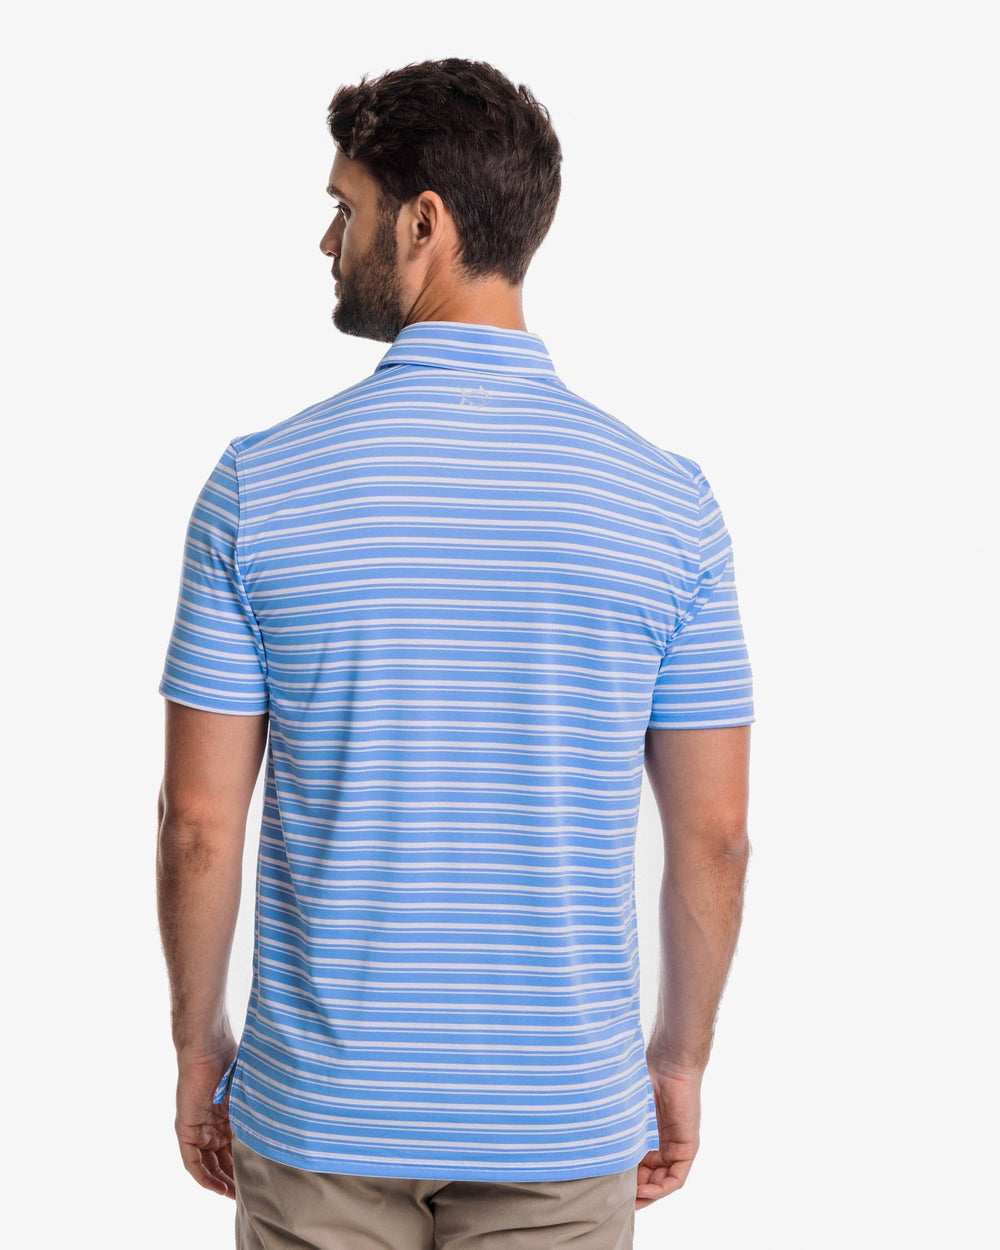 The back view of the Southern Tide Driver Alton Stripe Performance Polo Shirt by Southern Tide - Boat Blue